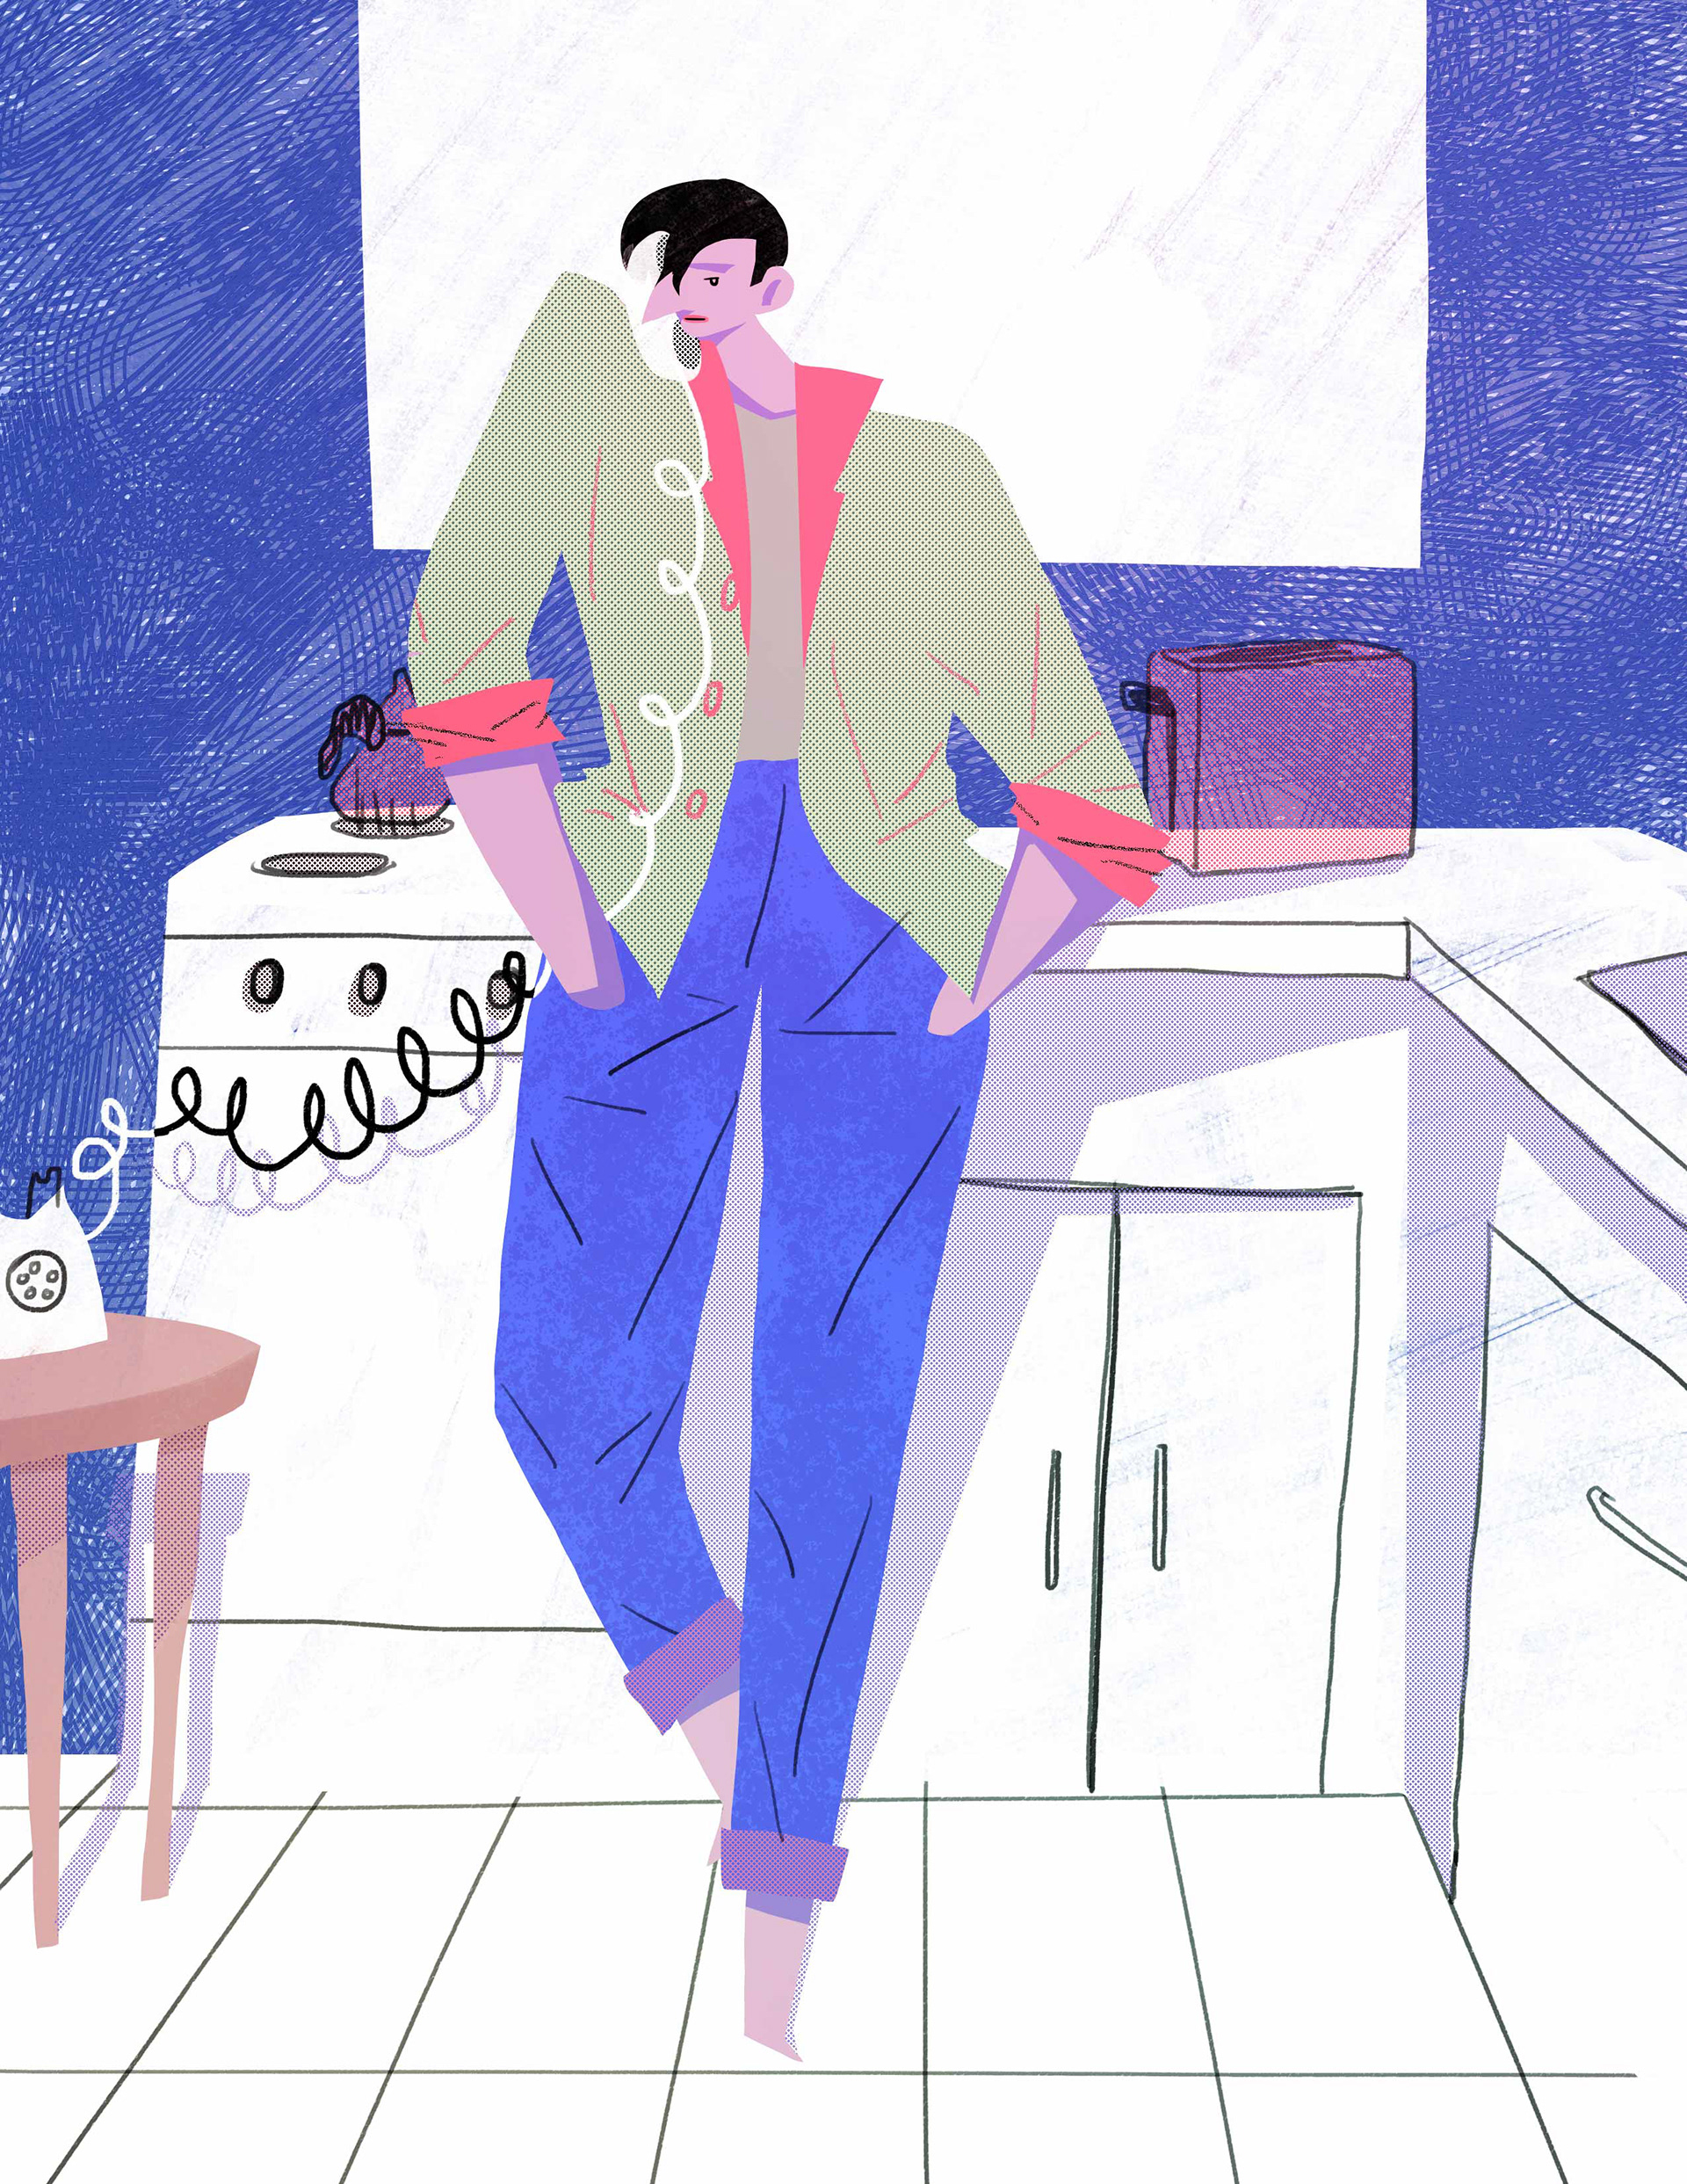 art by Edanur Kuntman showing a guy wearing a cool jacket in a kitchen talking to someone over the cable phone